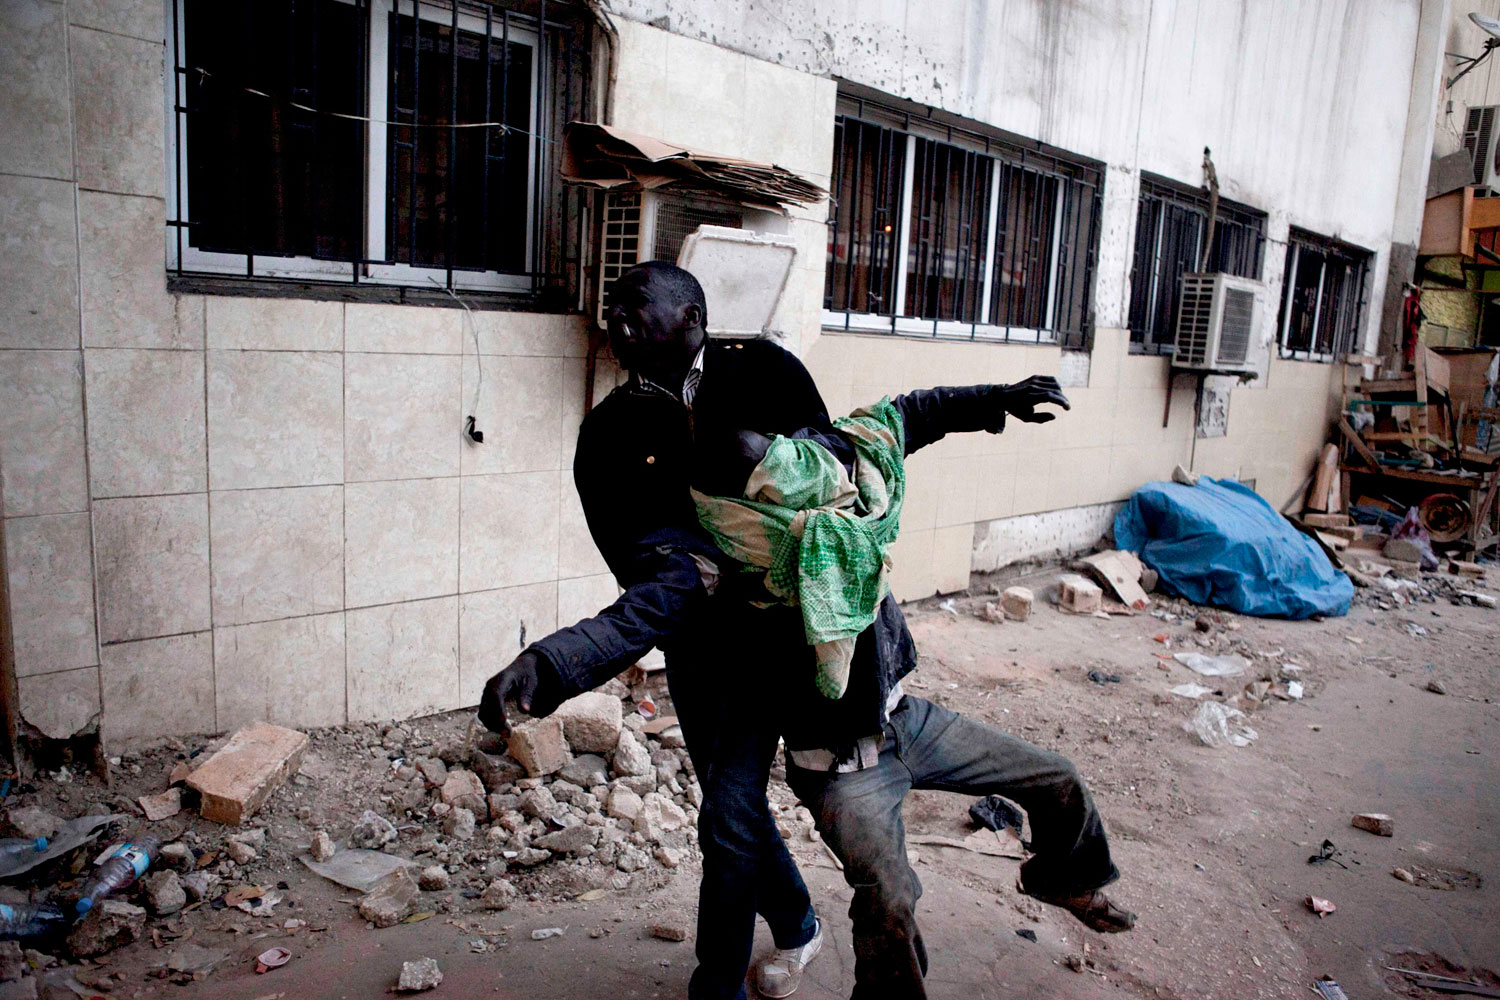 February 21, 2012. An anti-government protestor carries another injured protestor during clashes with police in Senegal's capital Dakar. Hundreds of opposition supporters clashed with Senegalese security forces in the capital on Tuesday as European Union observers criticised a ban on protests and an African envoy jetted in to try and stem rising violence.